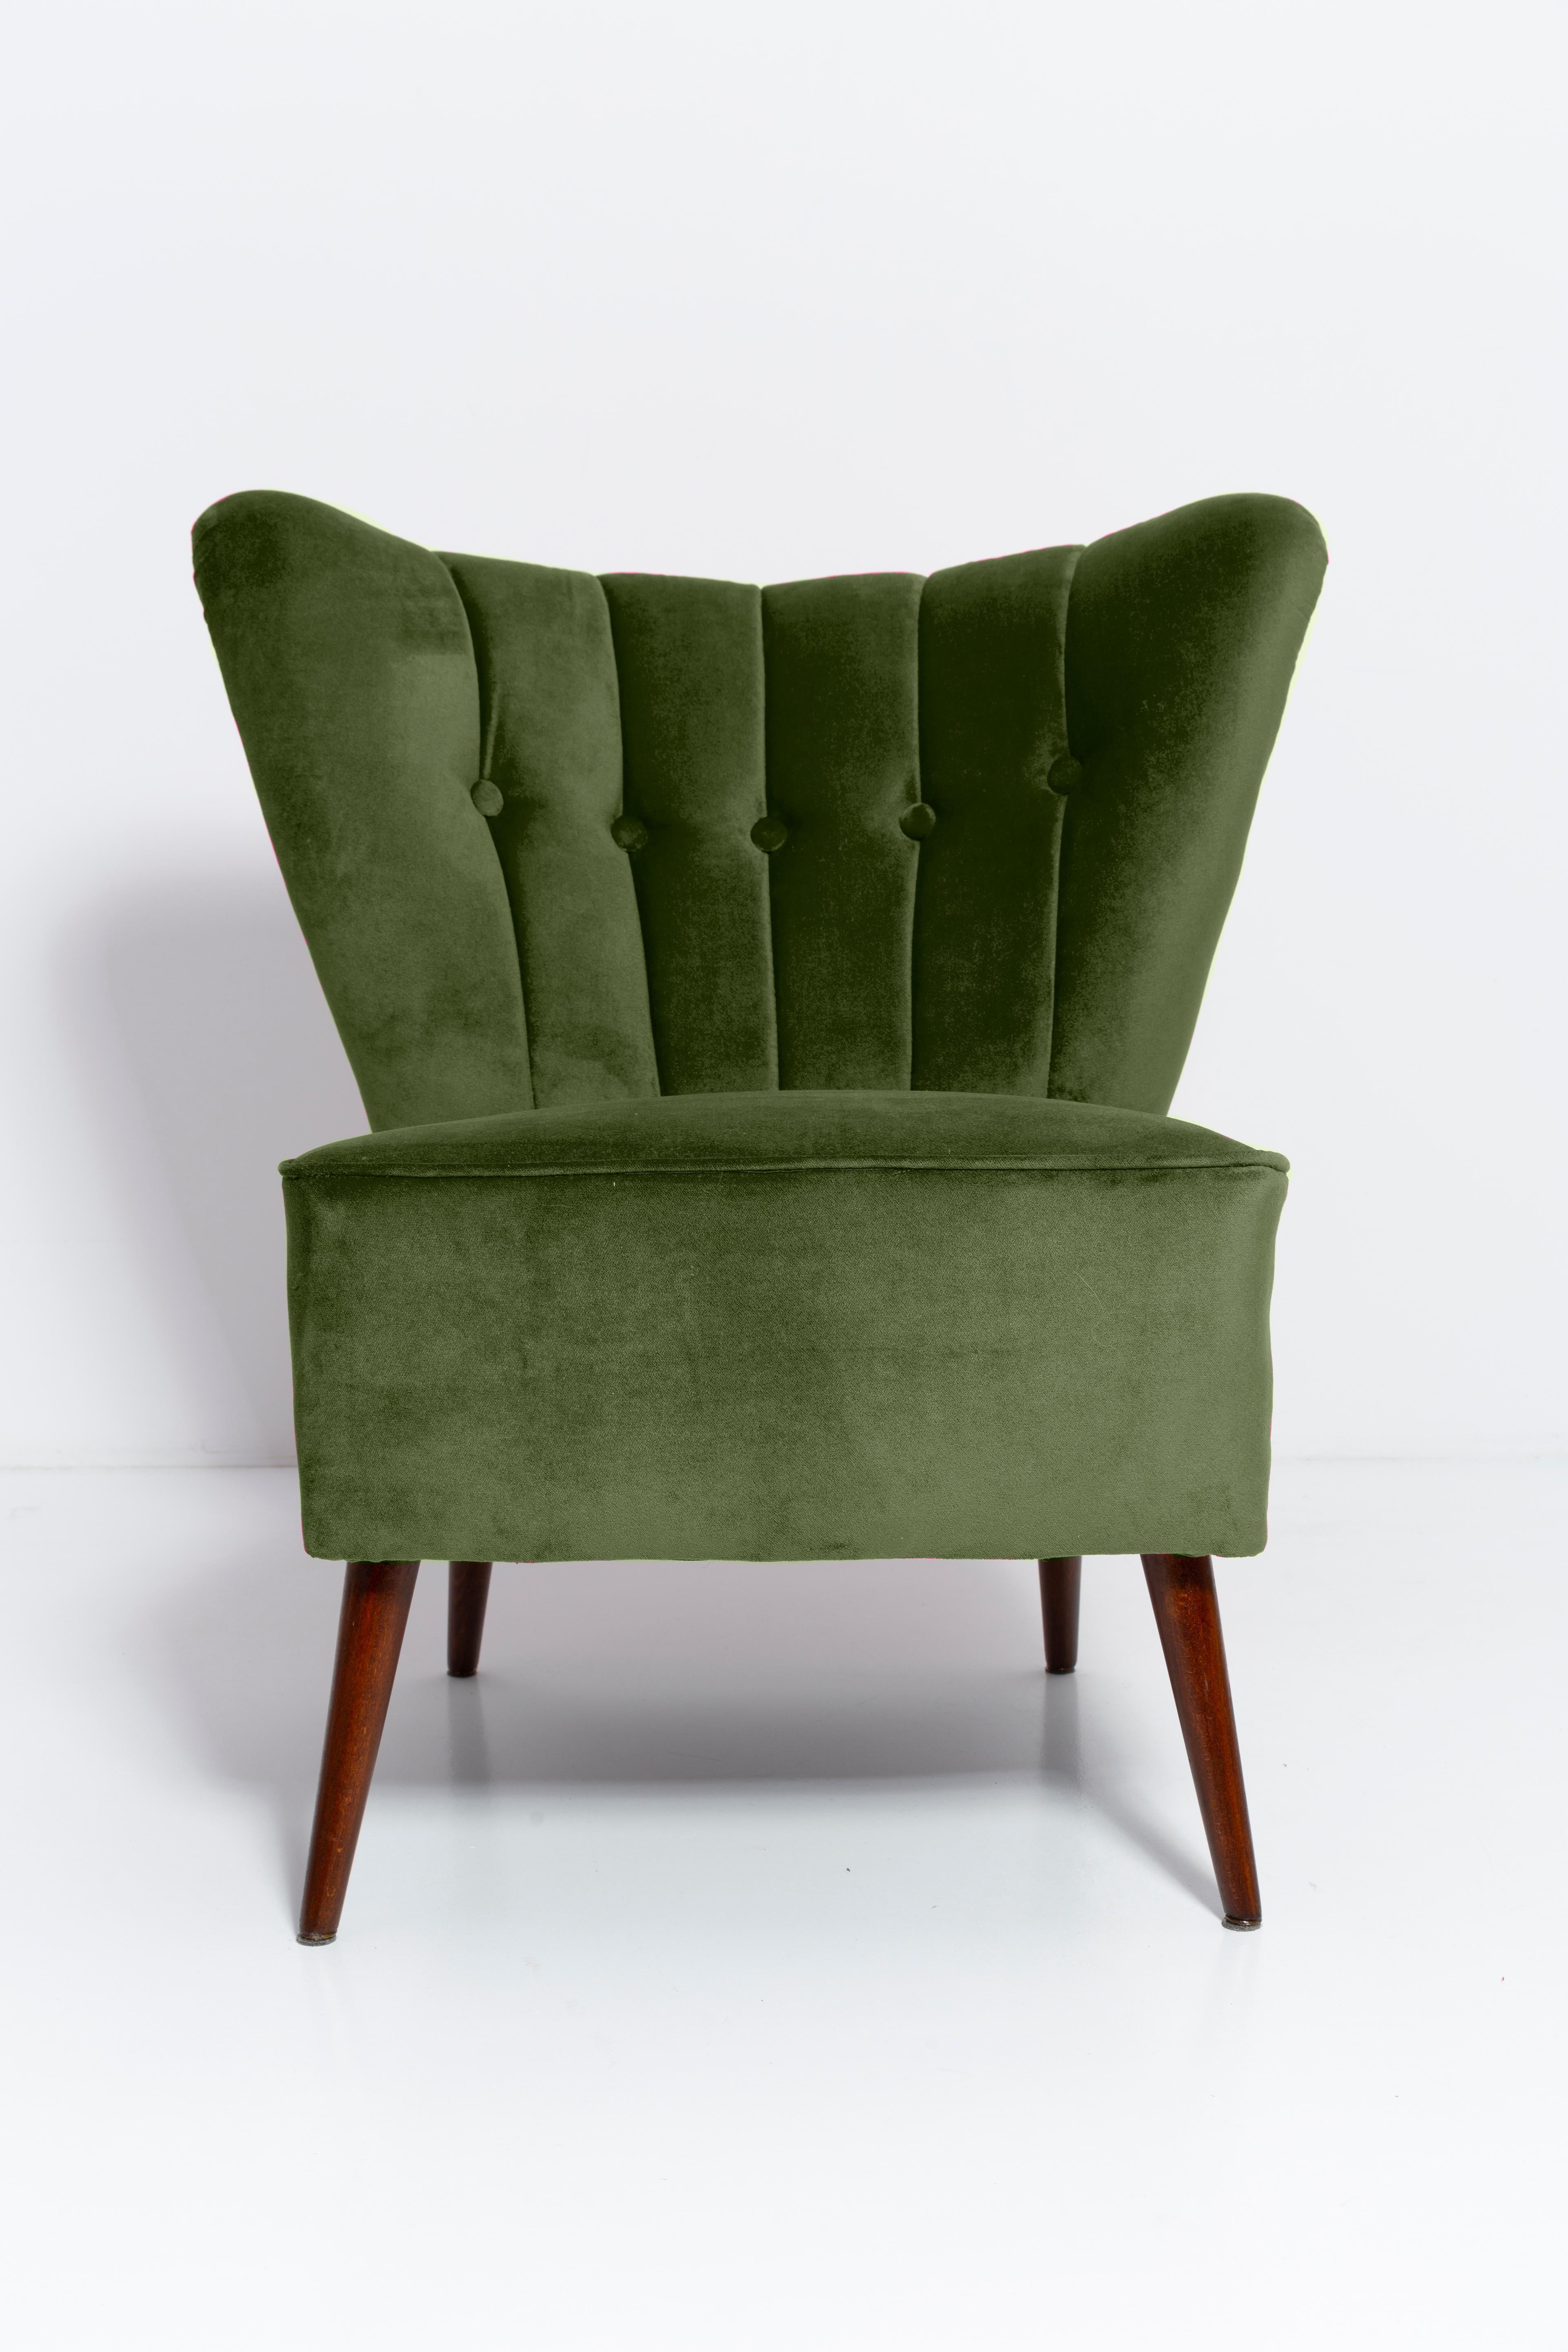 Set of Two Mid-Century Green Velvet Club Armchairs, Europe, 1960s For Sale 2